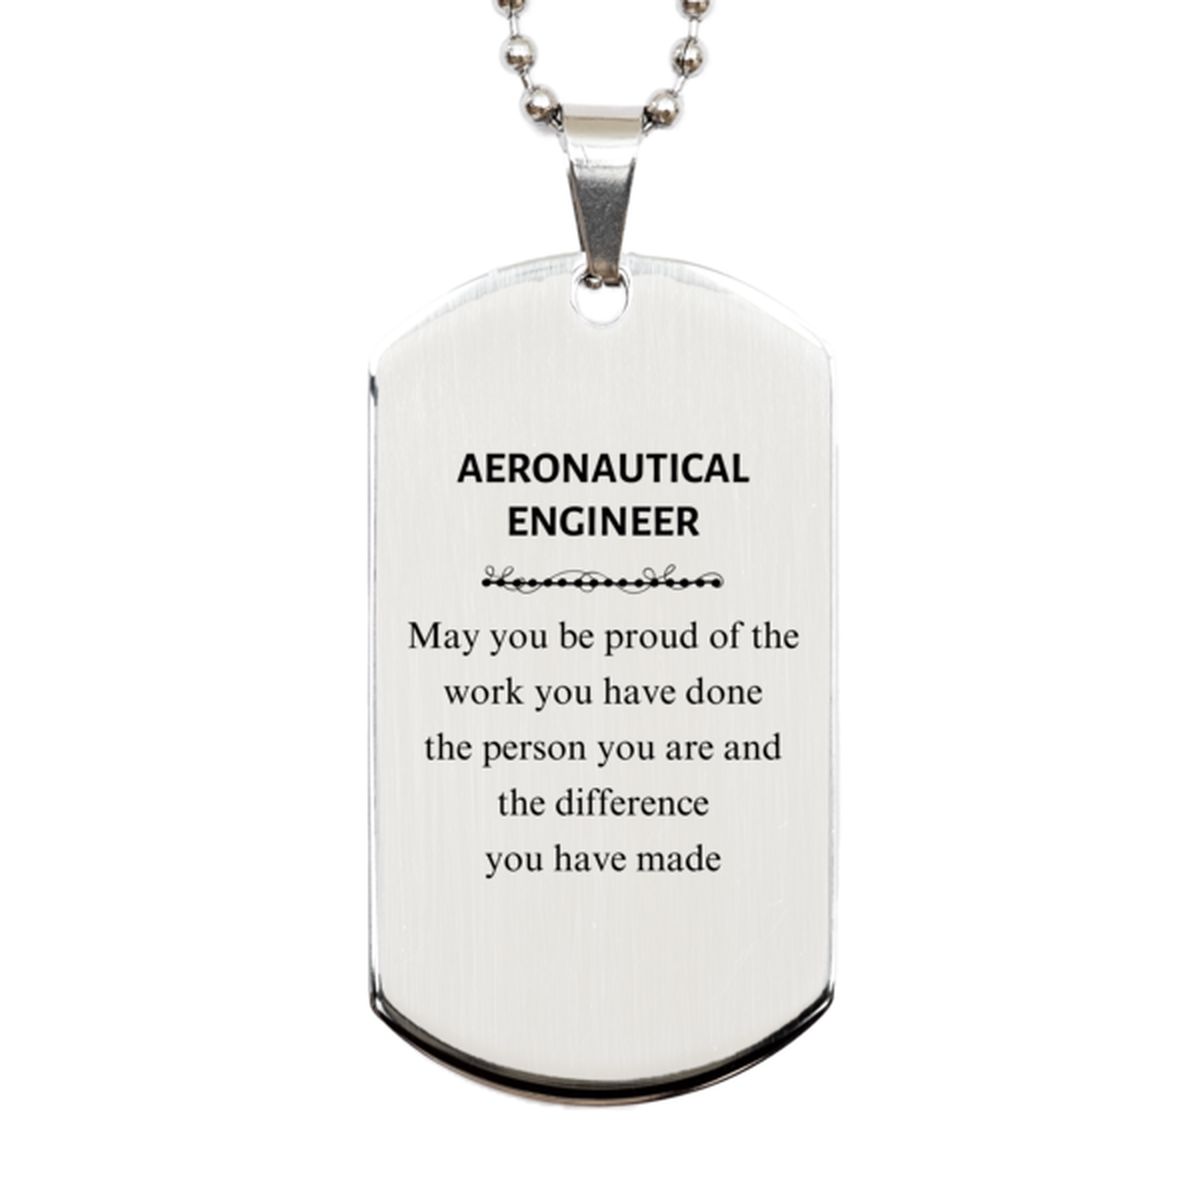 Aeronautical Engineer May you be proud of the work you have done, Retirement Aeronautical Engineer Silver Dog Tag for Colleague Appreciation Gifts Amazing for Aeronautical Engineer